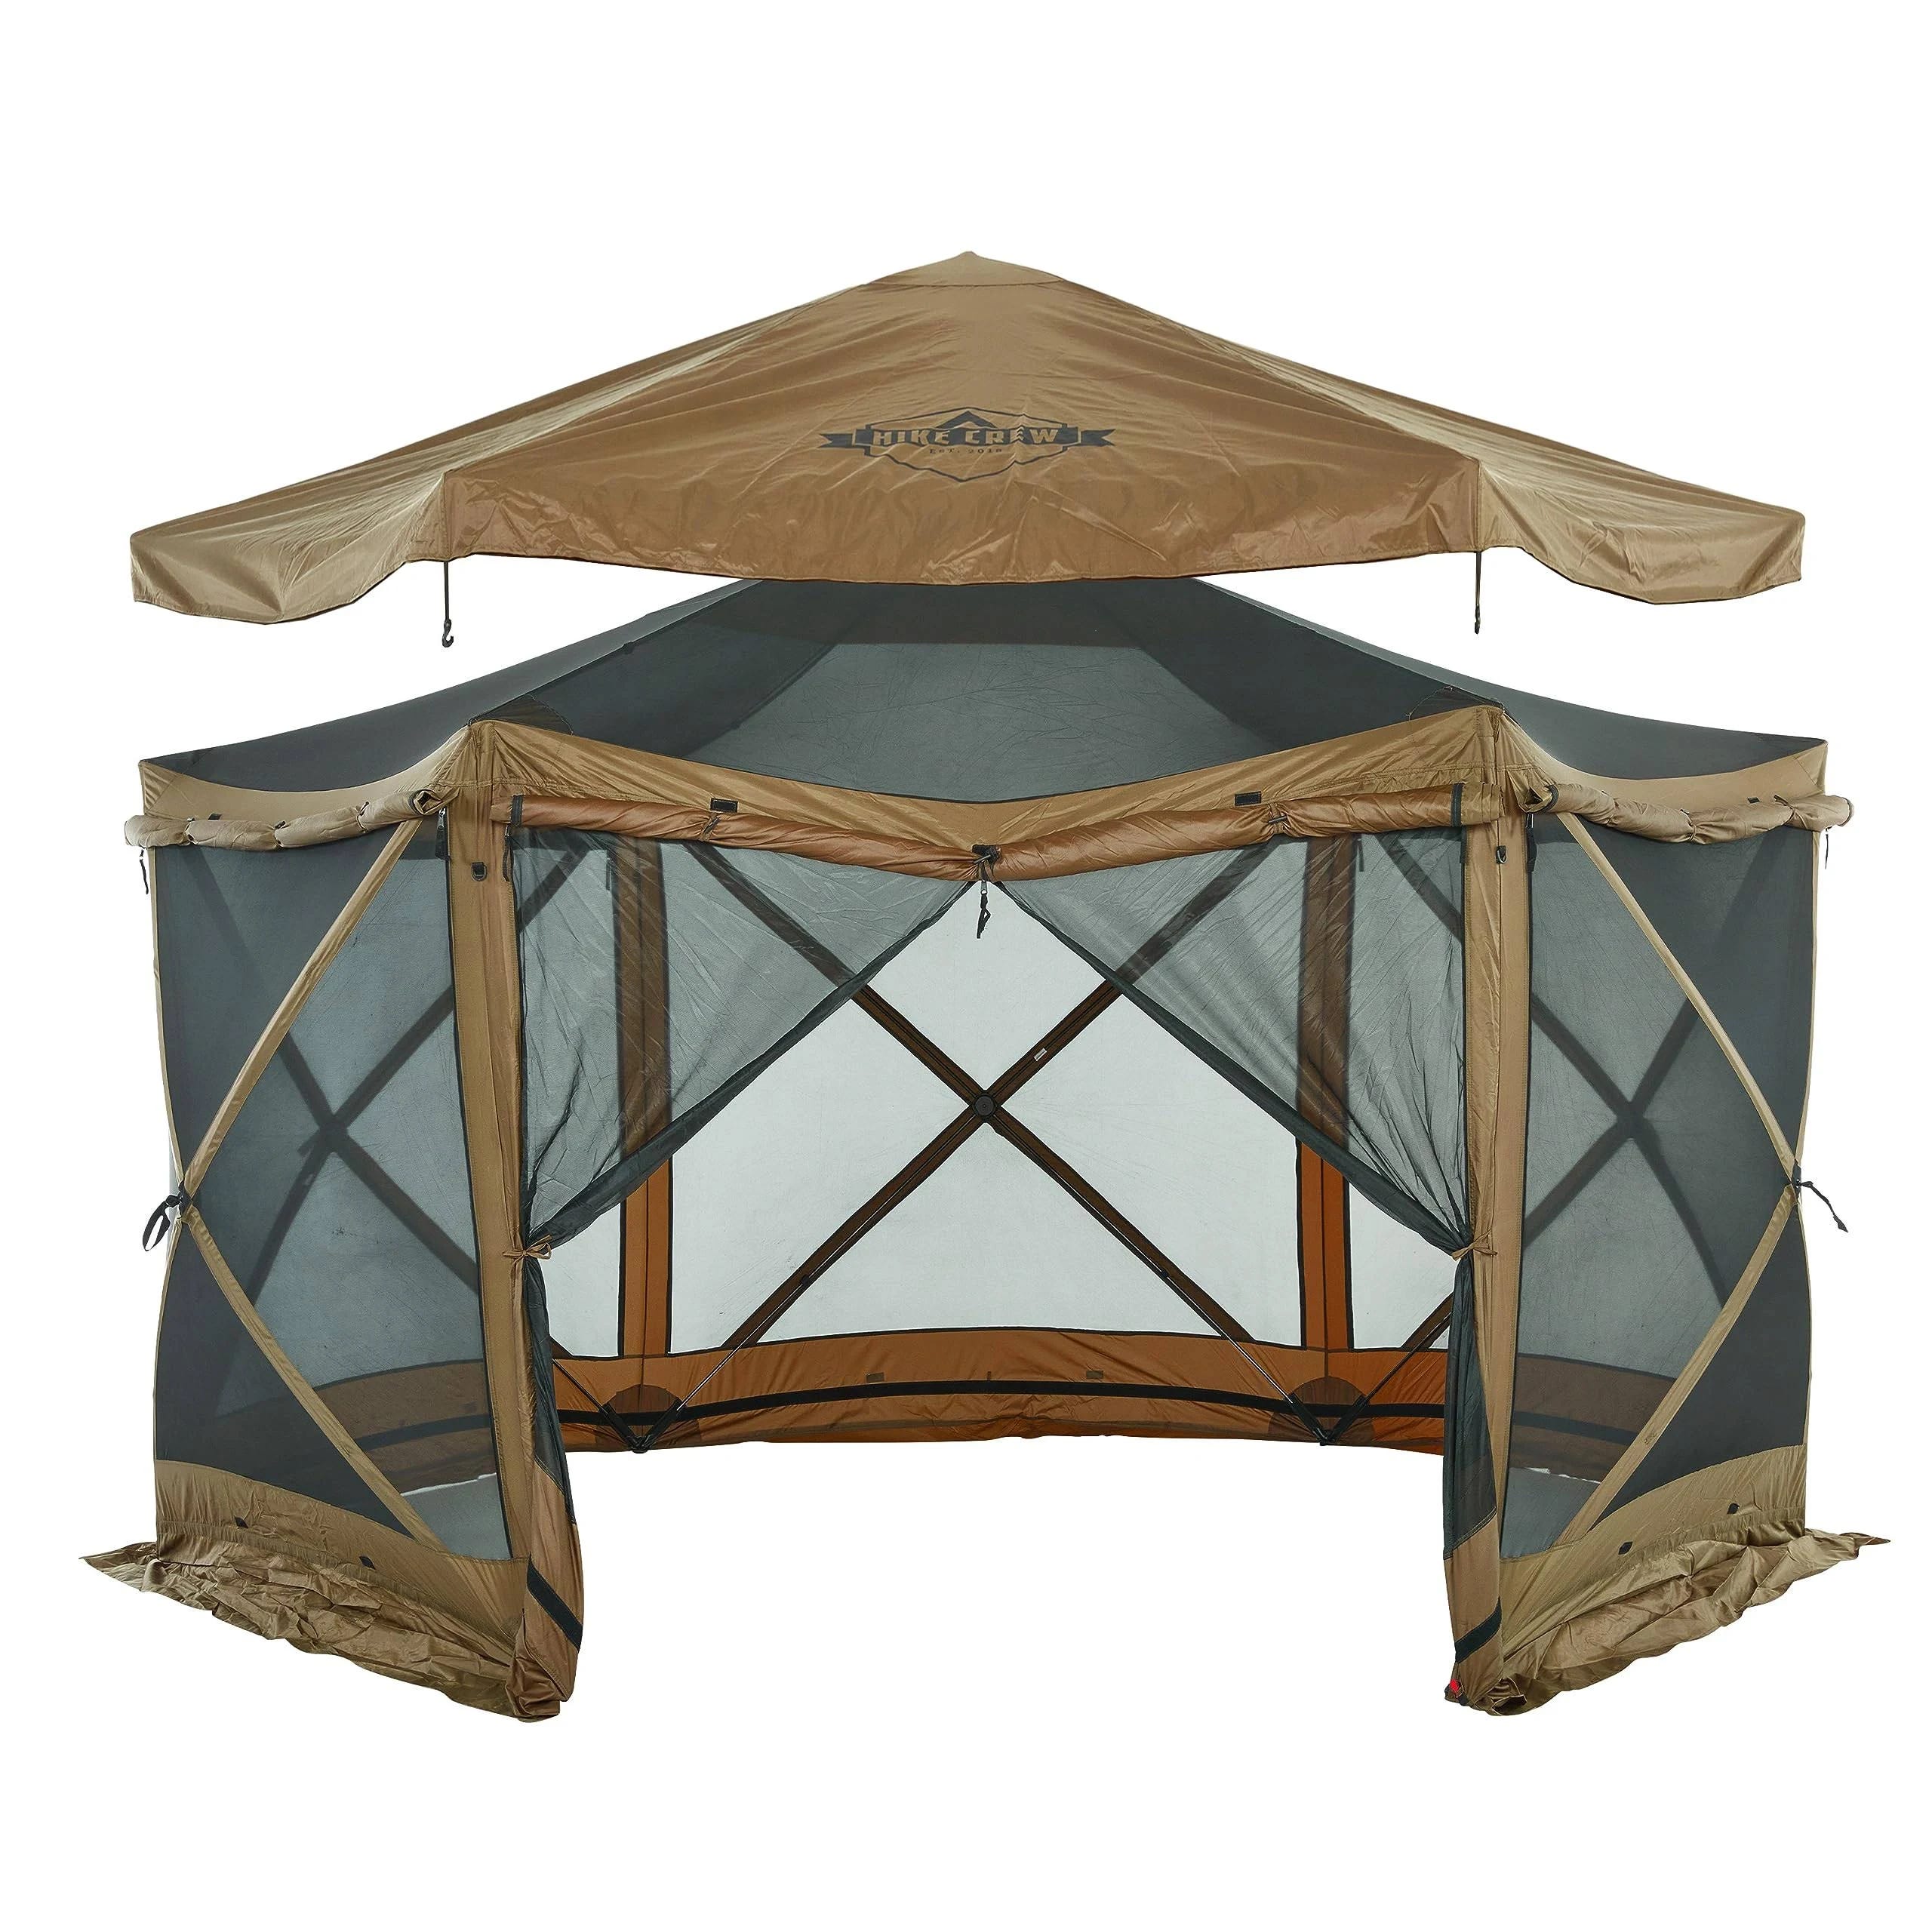 13' Screened Roof Gazebo Tent for Camping | Image